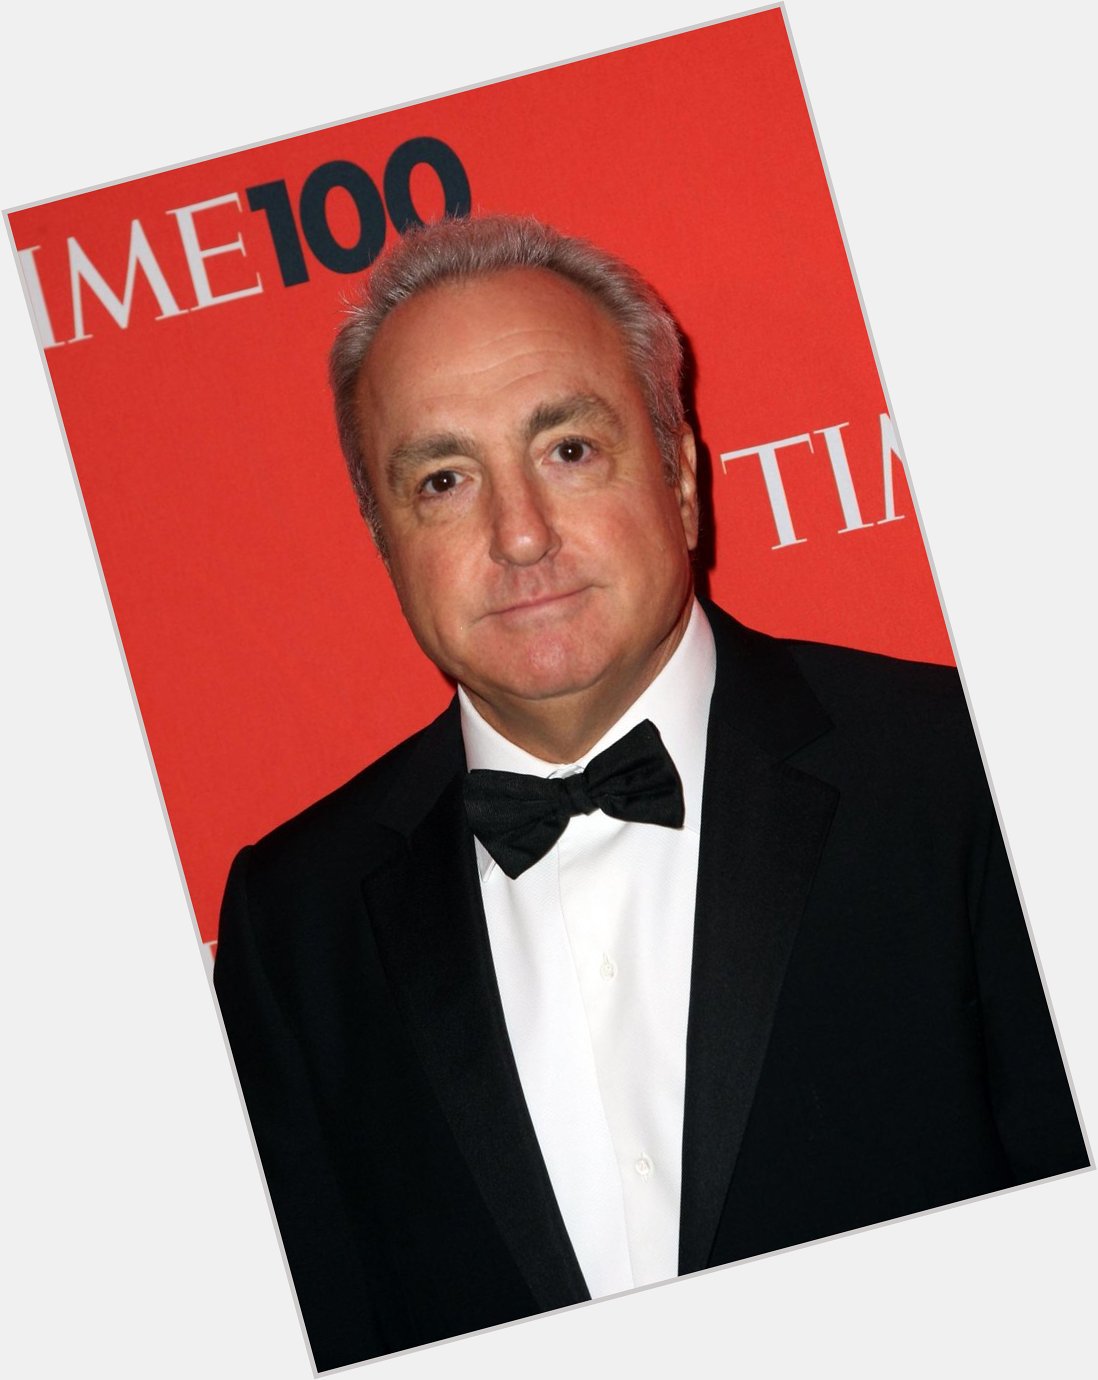 Happy Birthday to Lorne Michaels, who turns 70 today! 